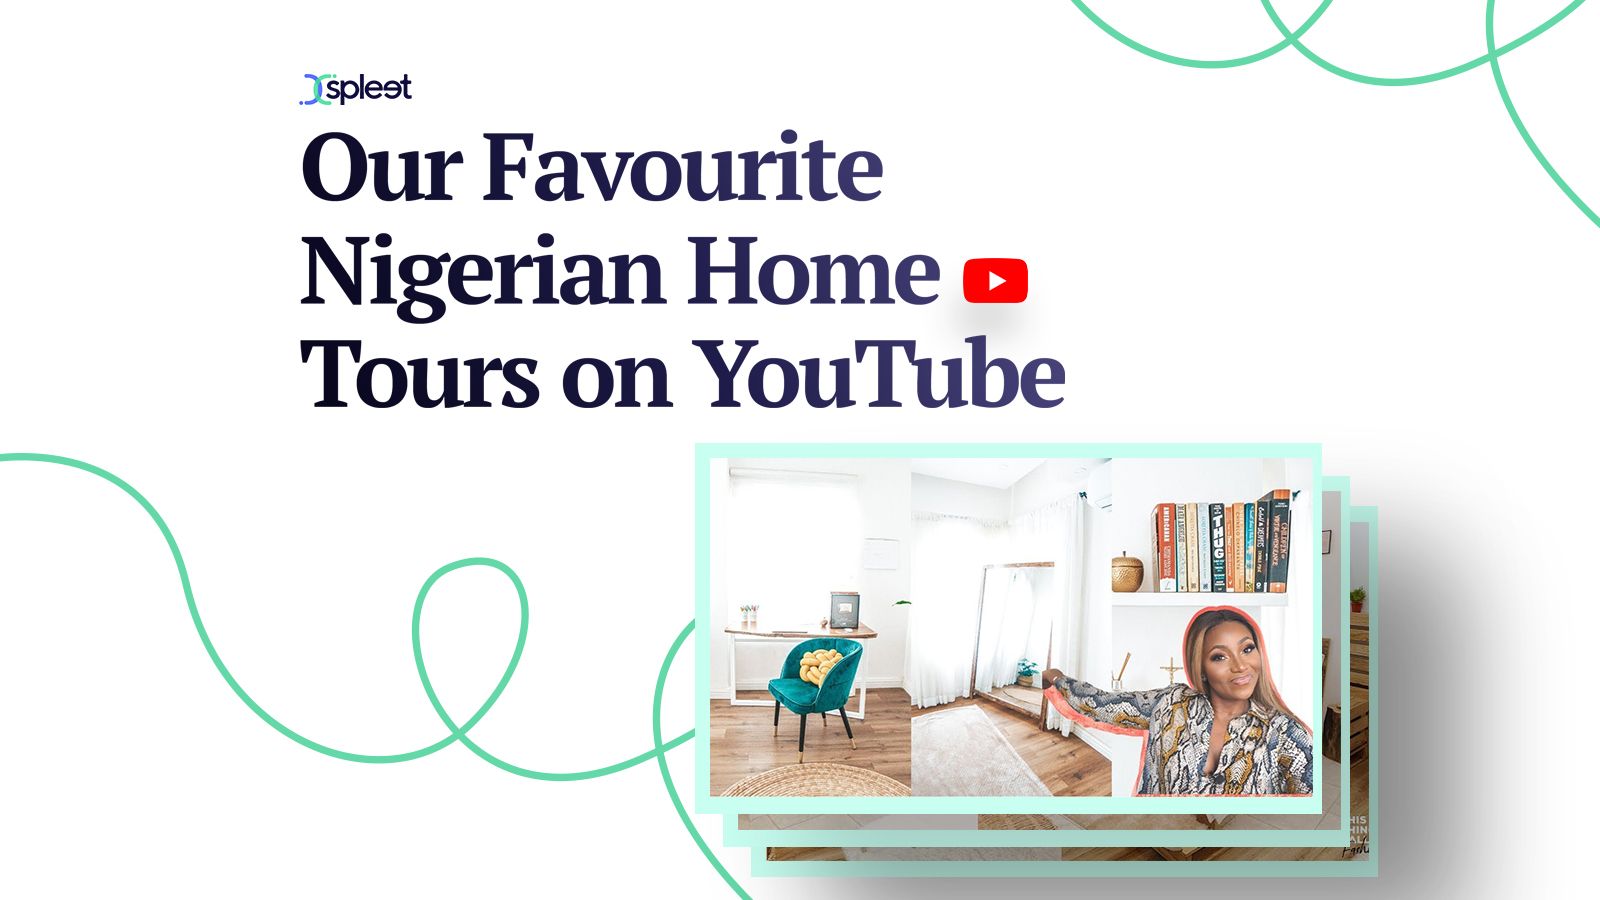 Our Favourite Nigerian Home Tours on YouTube